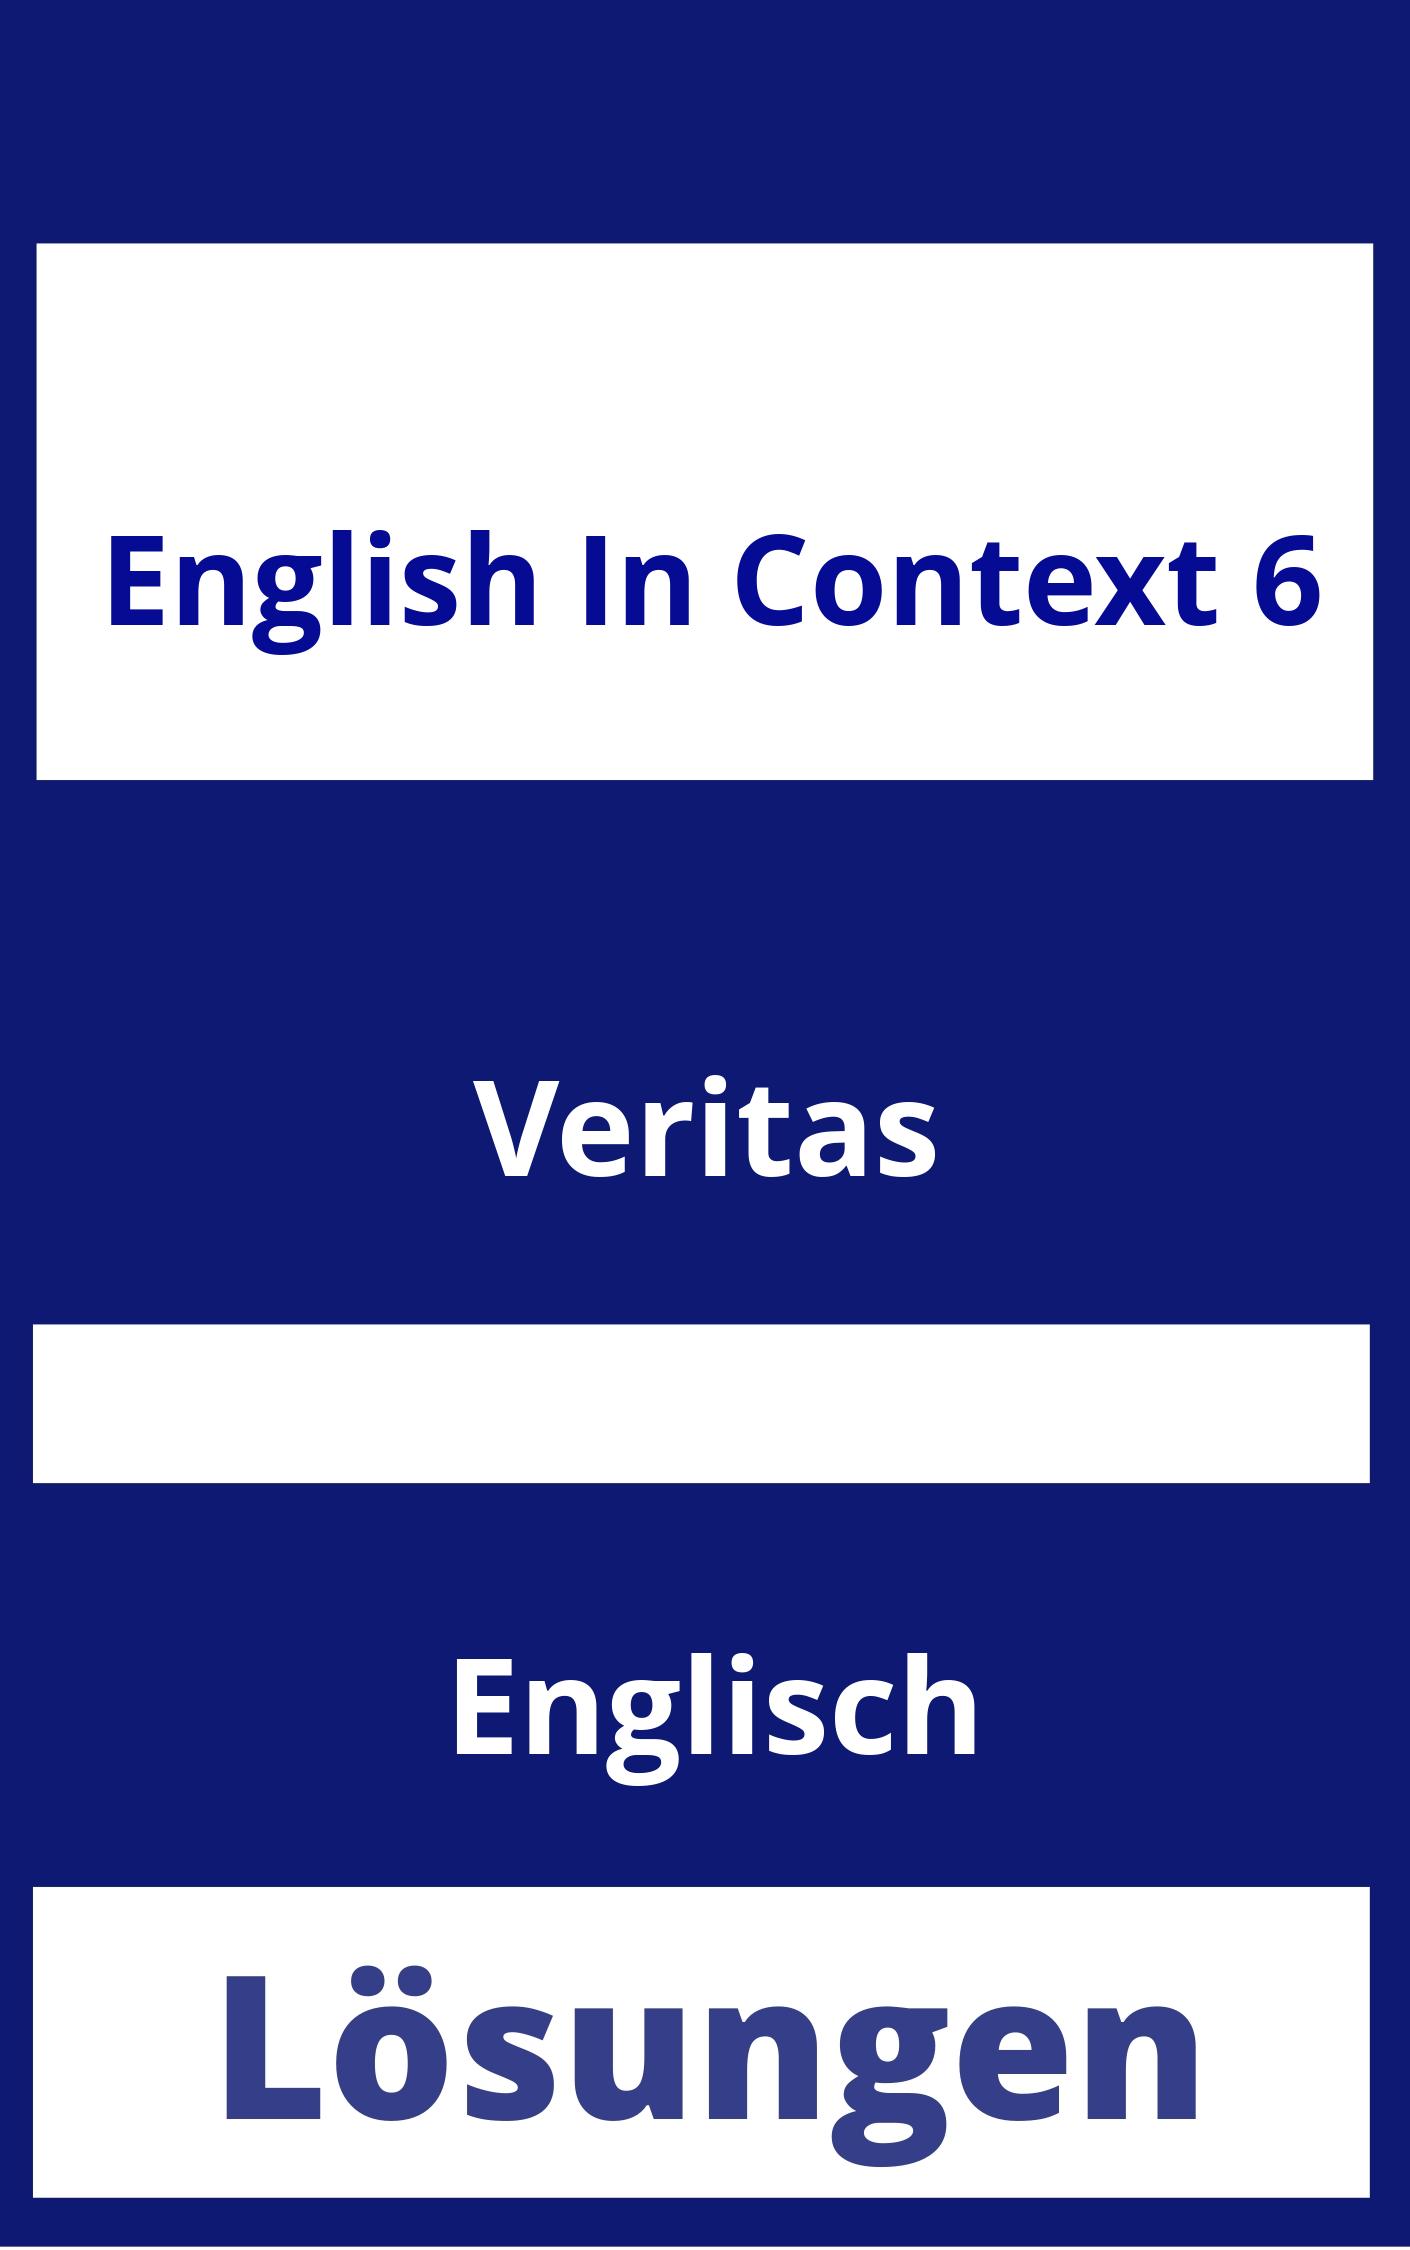 English in Context 6